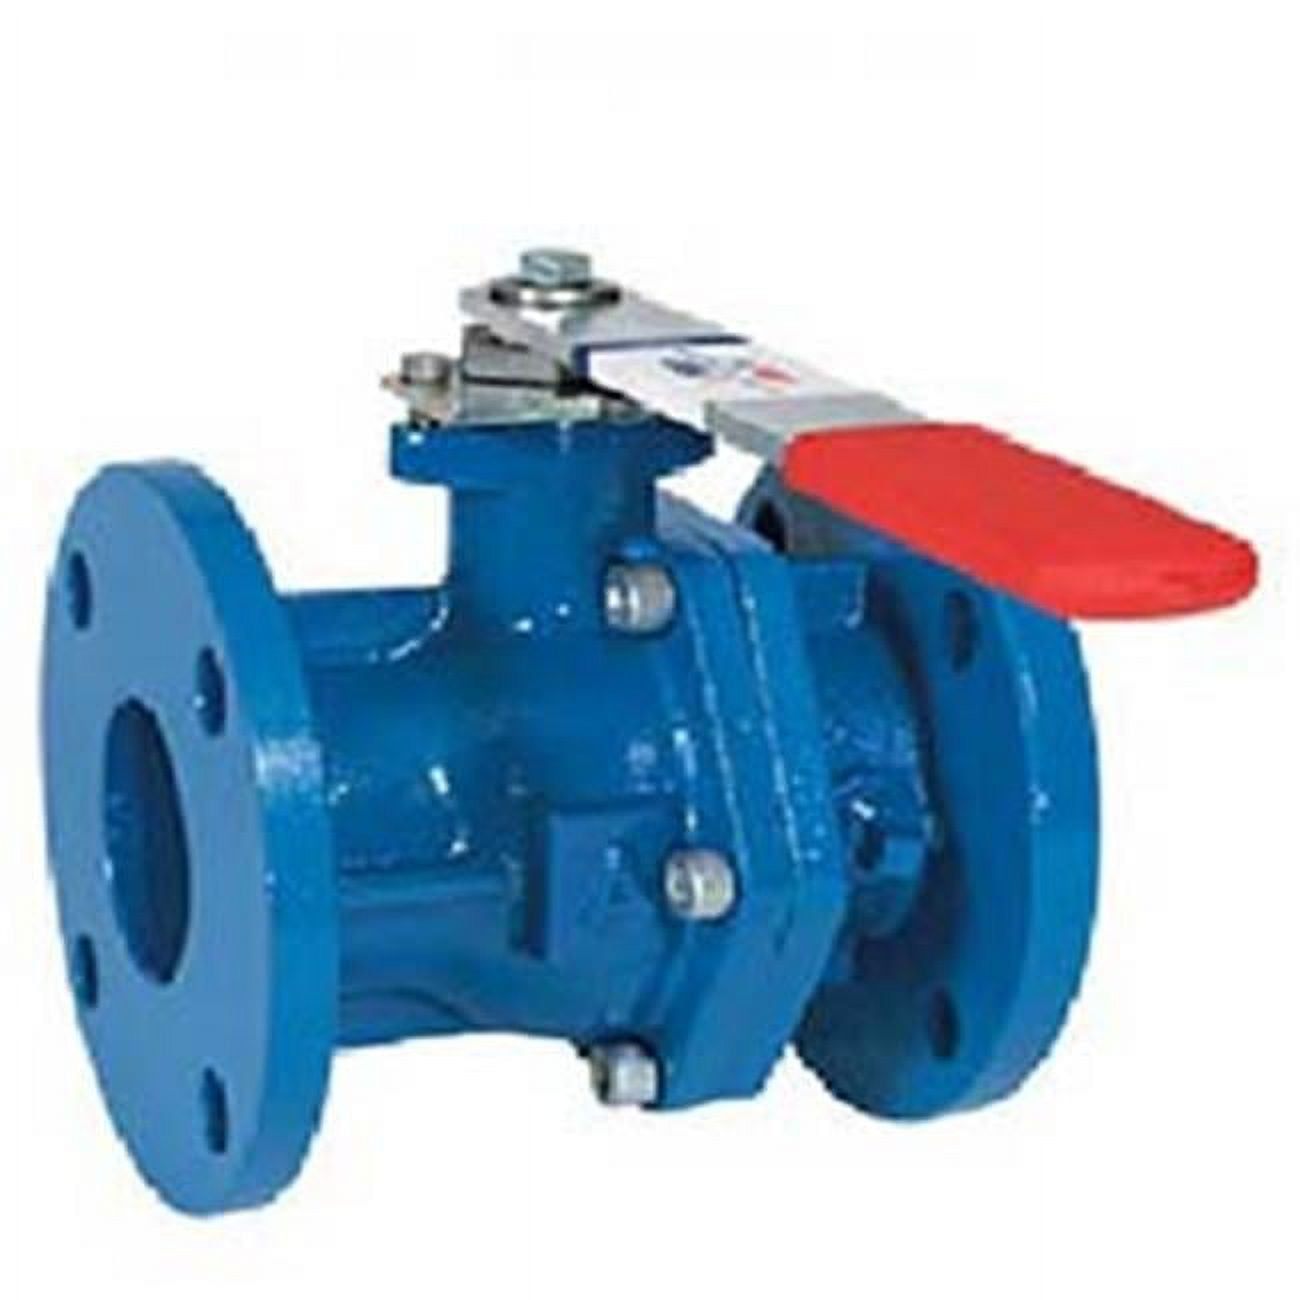 Picture of American Valve 3700 8 8 in. Cast Iron Flanged Ball Valve